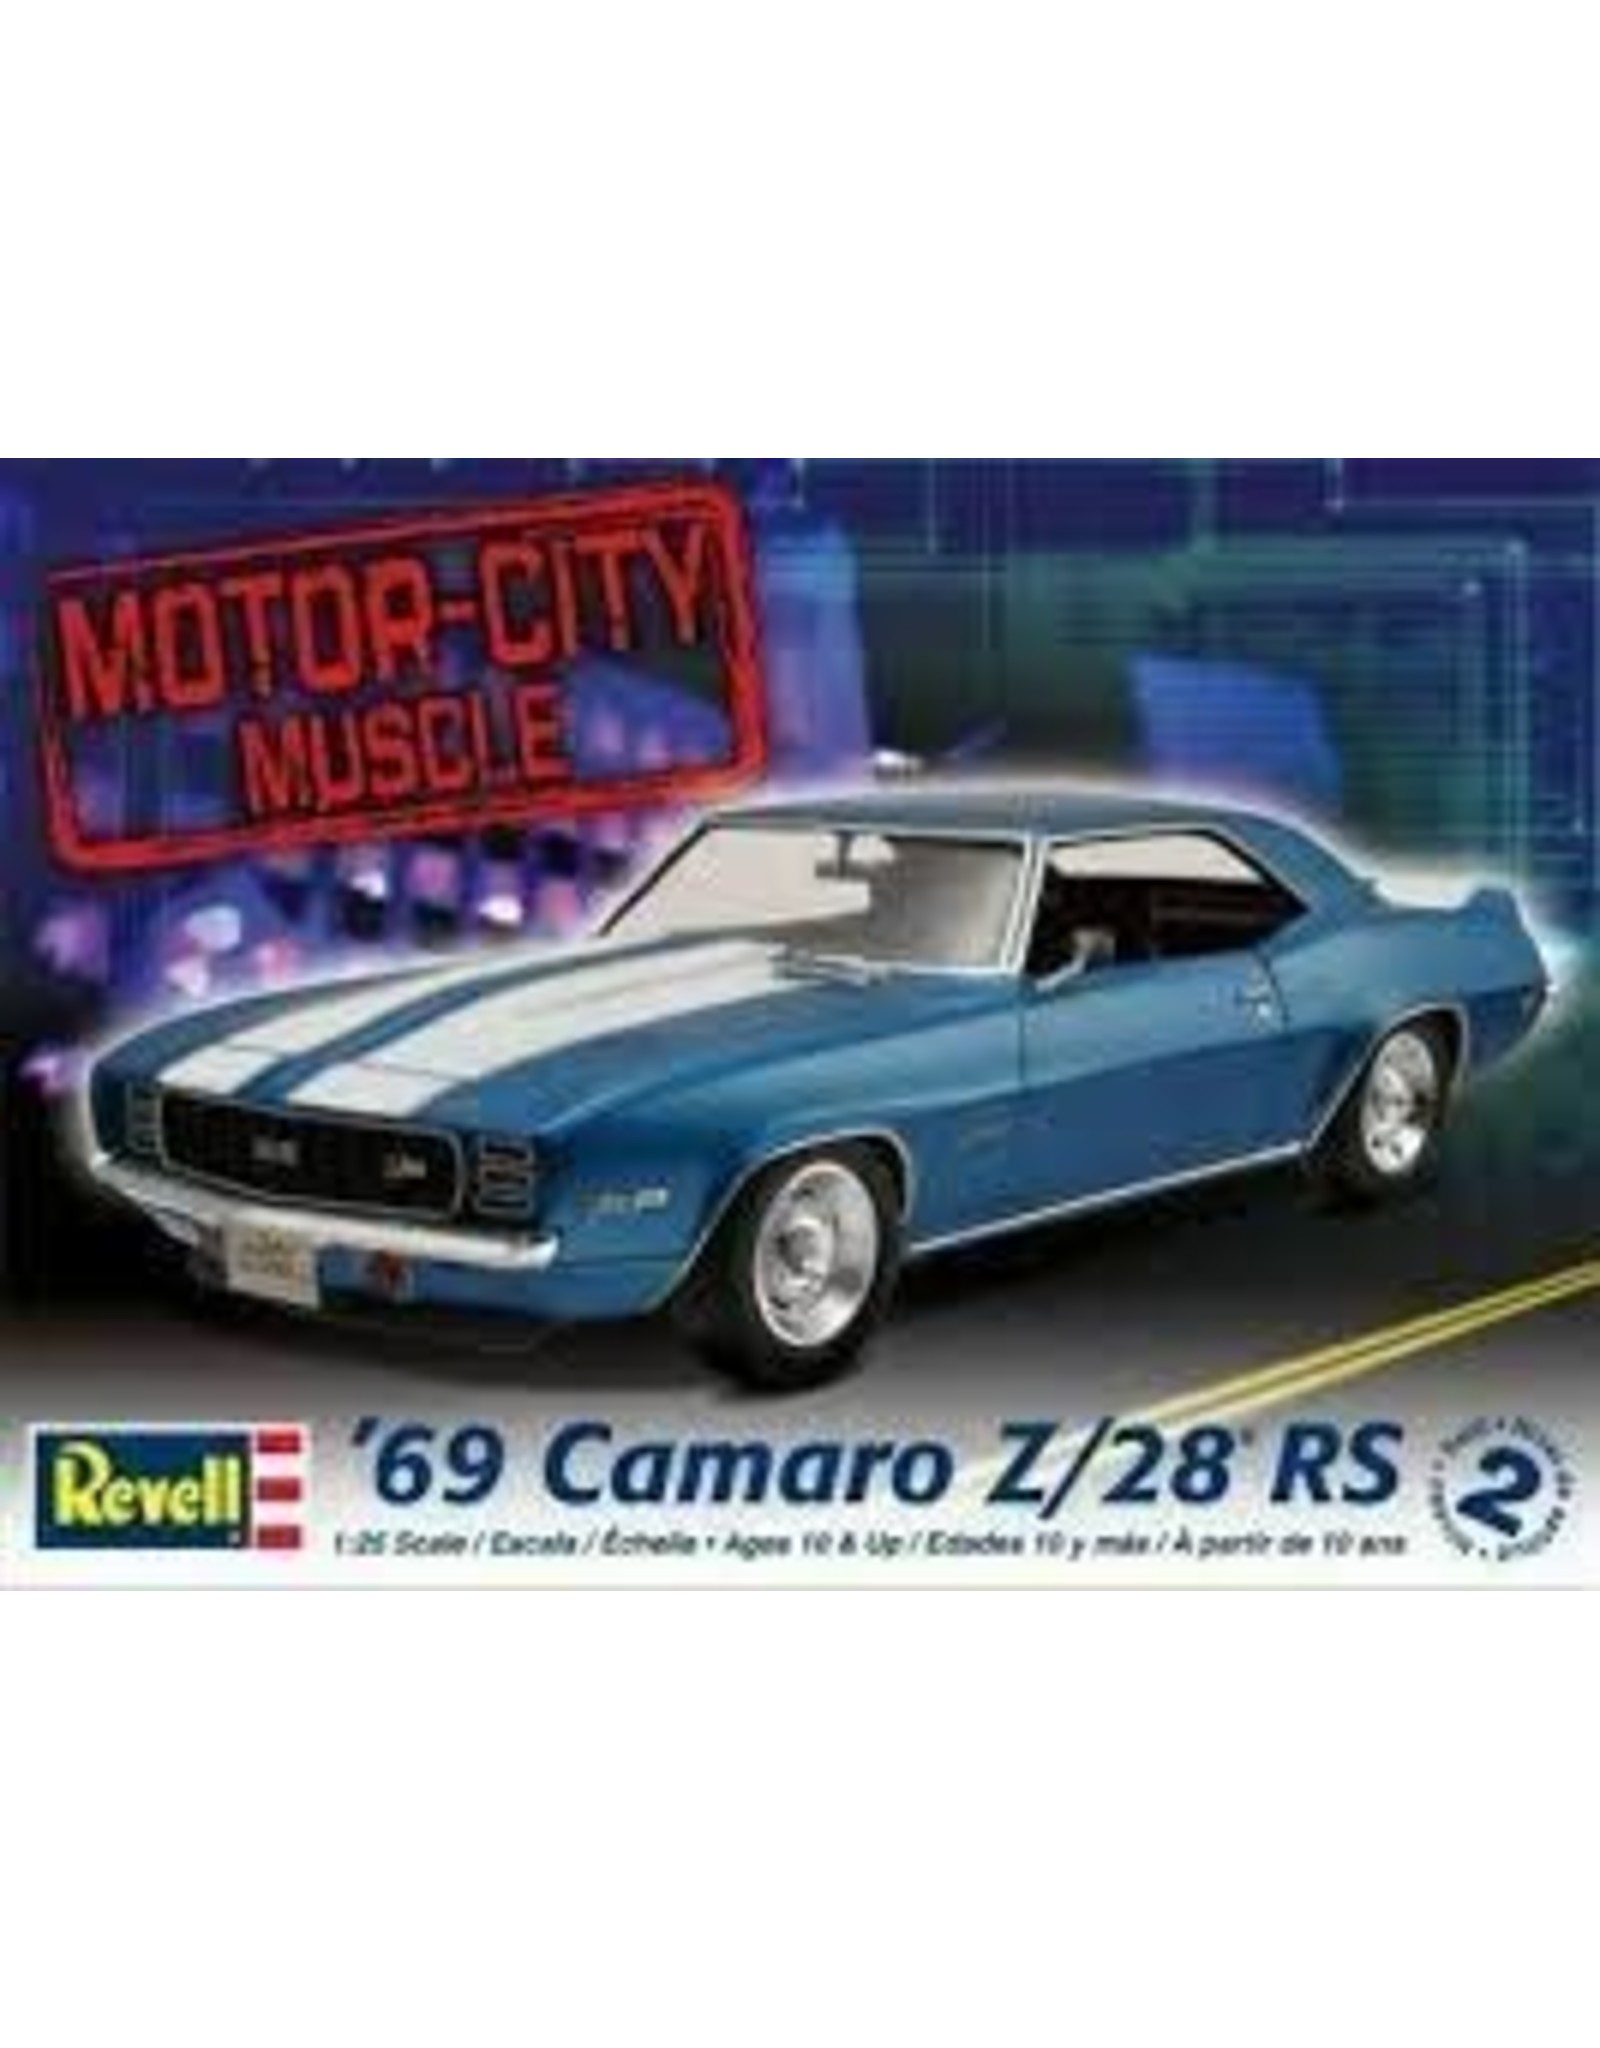 Revell Motor-City muscle - '69 Camaro Z/28 RS